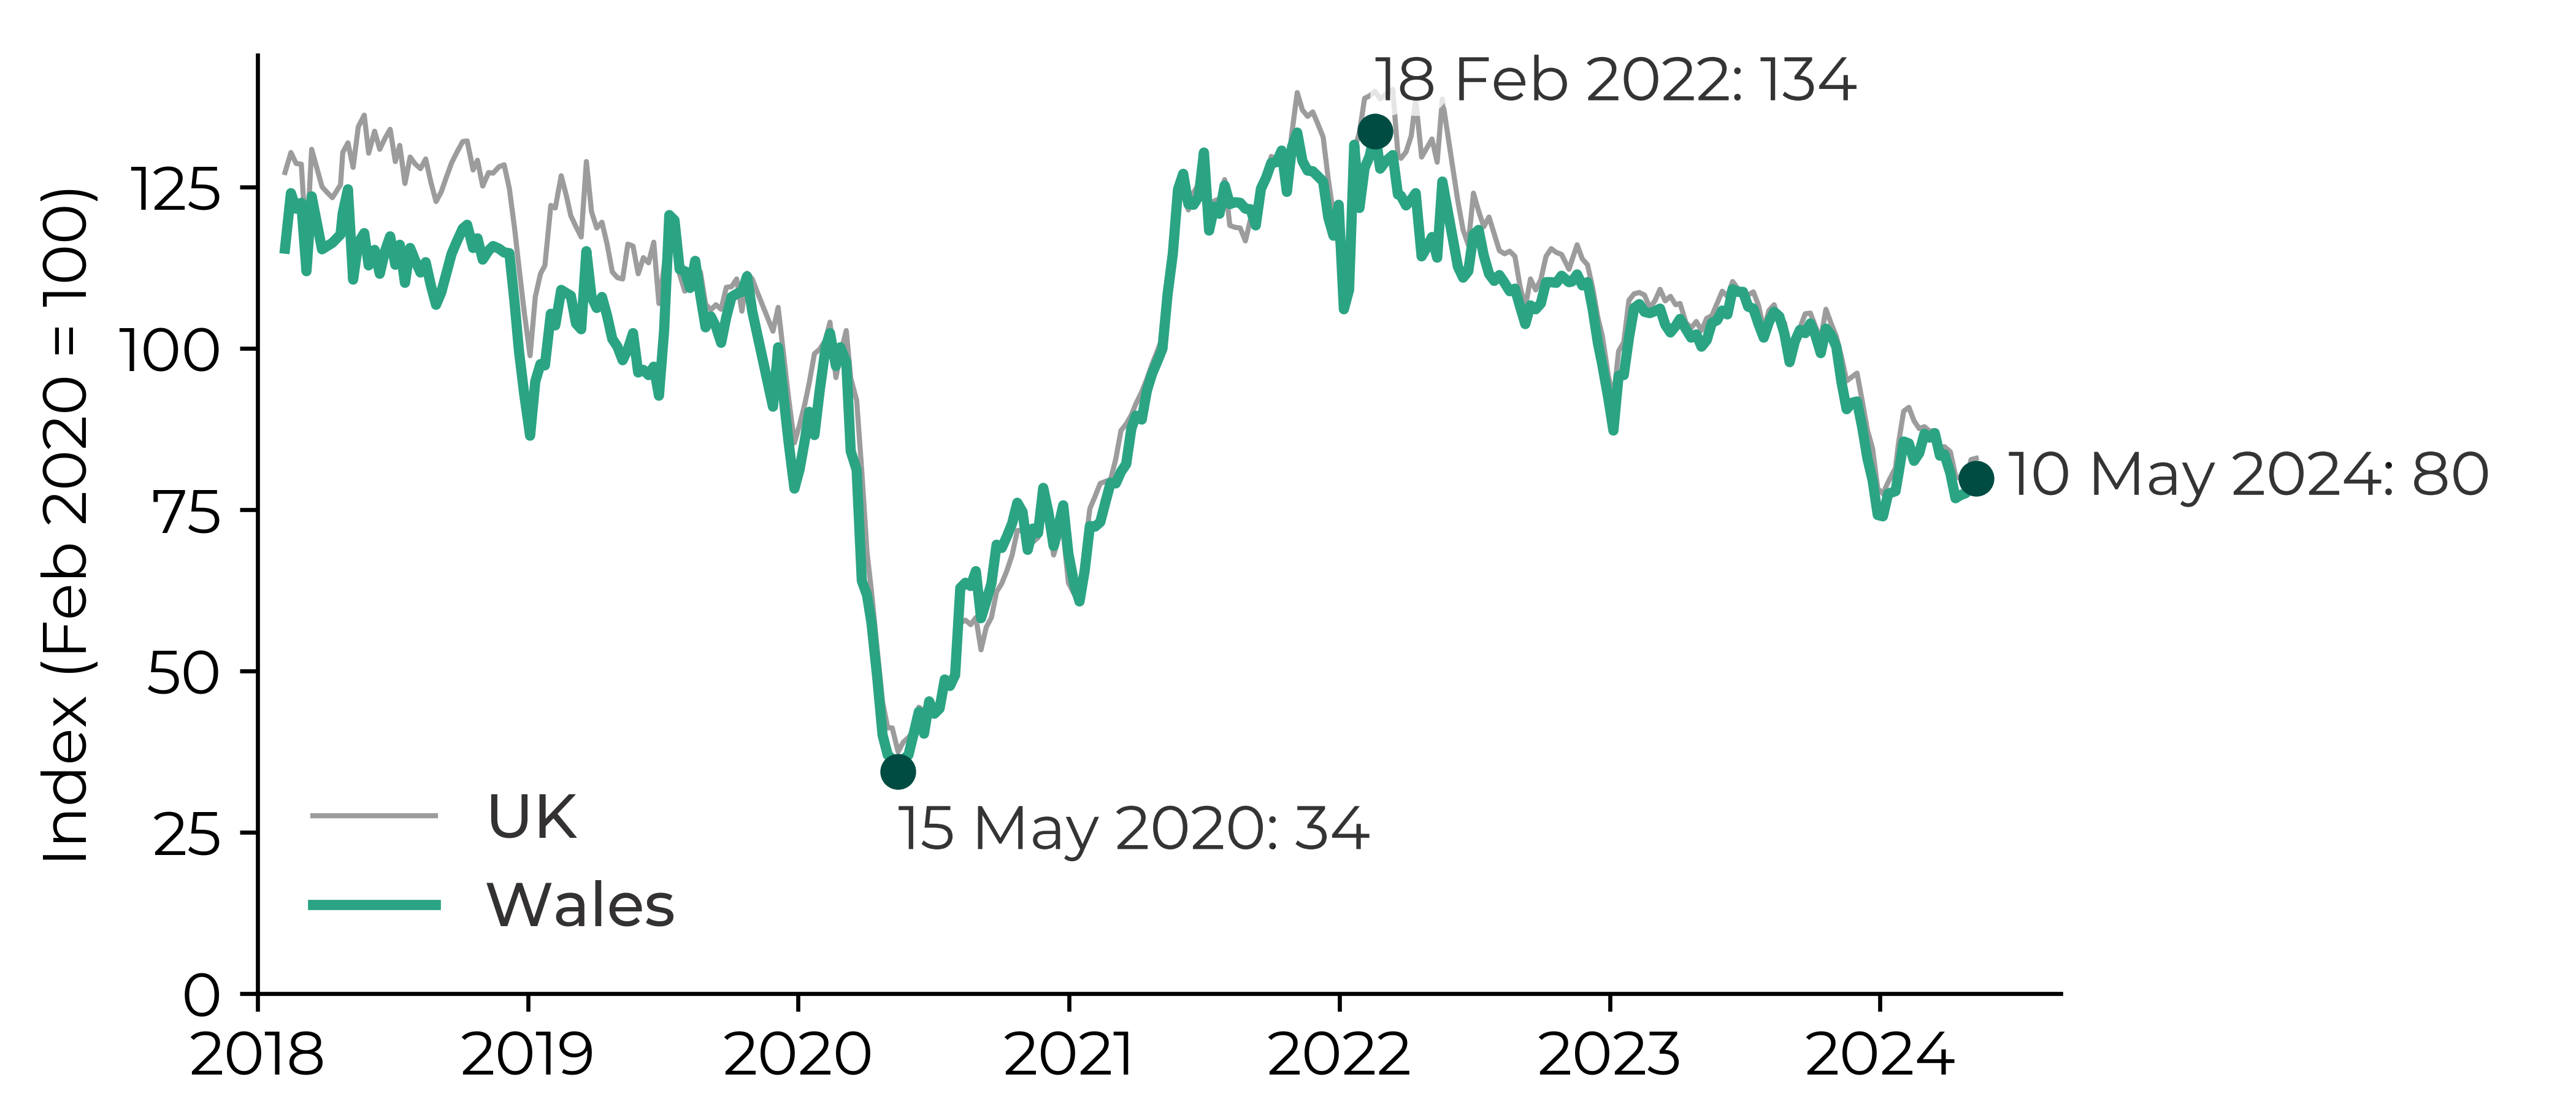 Graph showing that the index decreased from 100 in February 2020 to 34 in May 2020. The index increased to 134 by February 2022 and decreased to 80 by May 2024.